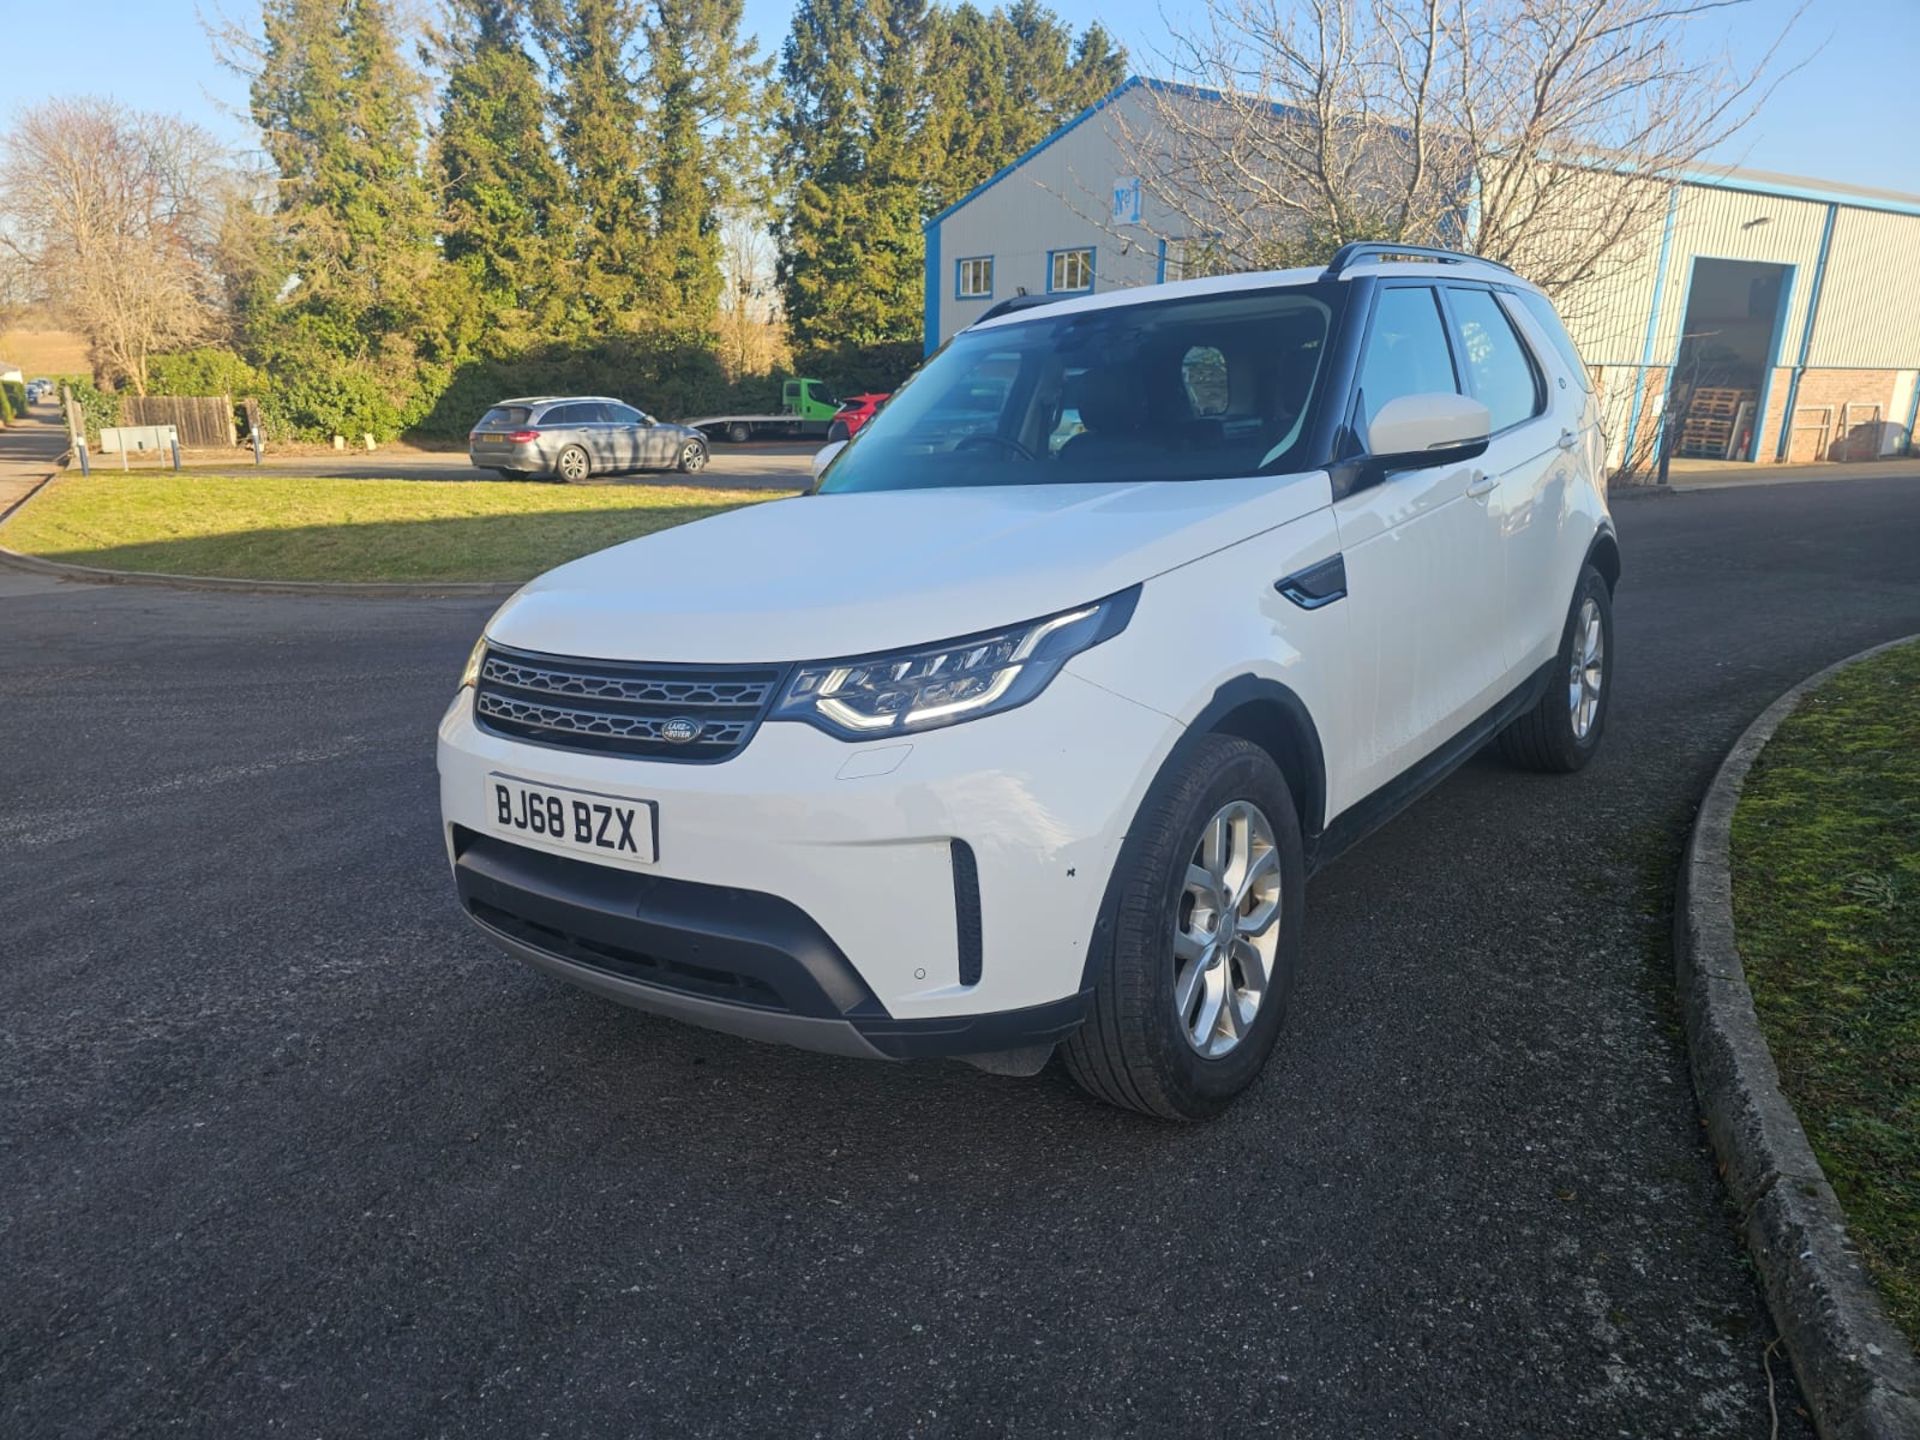 2018 DISCOVERY 5 SE RUNS AND DRIVES PERFECTLY - Image 3 of 6